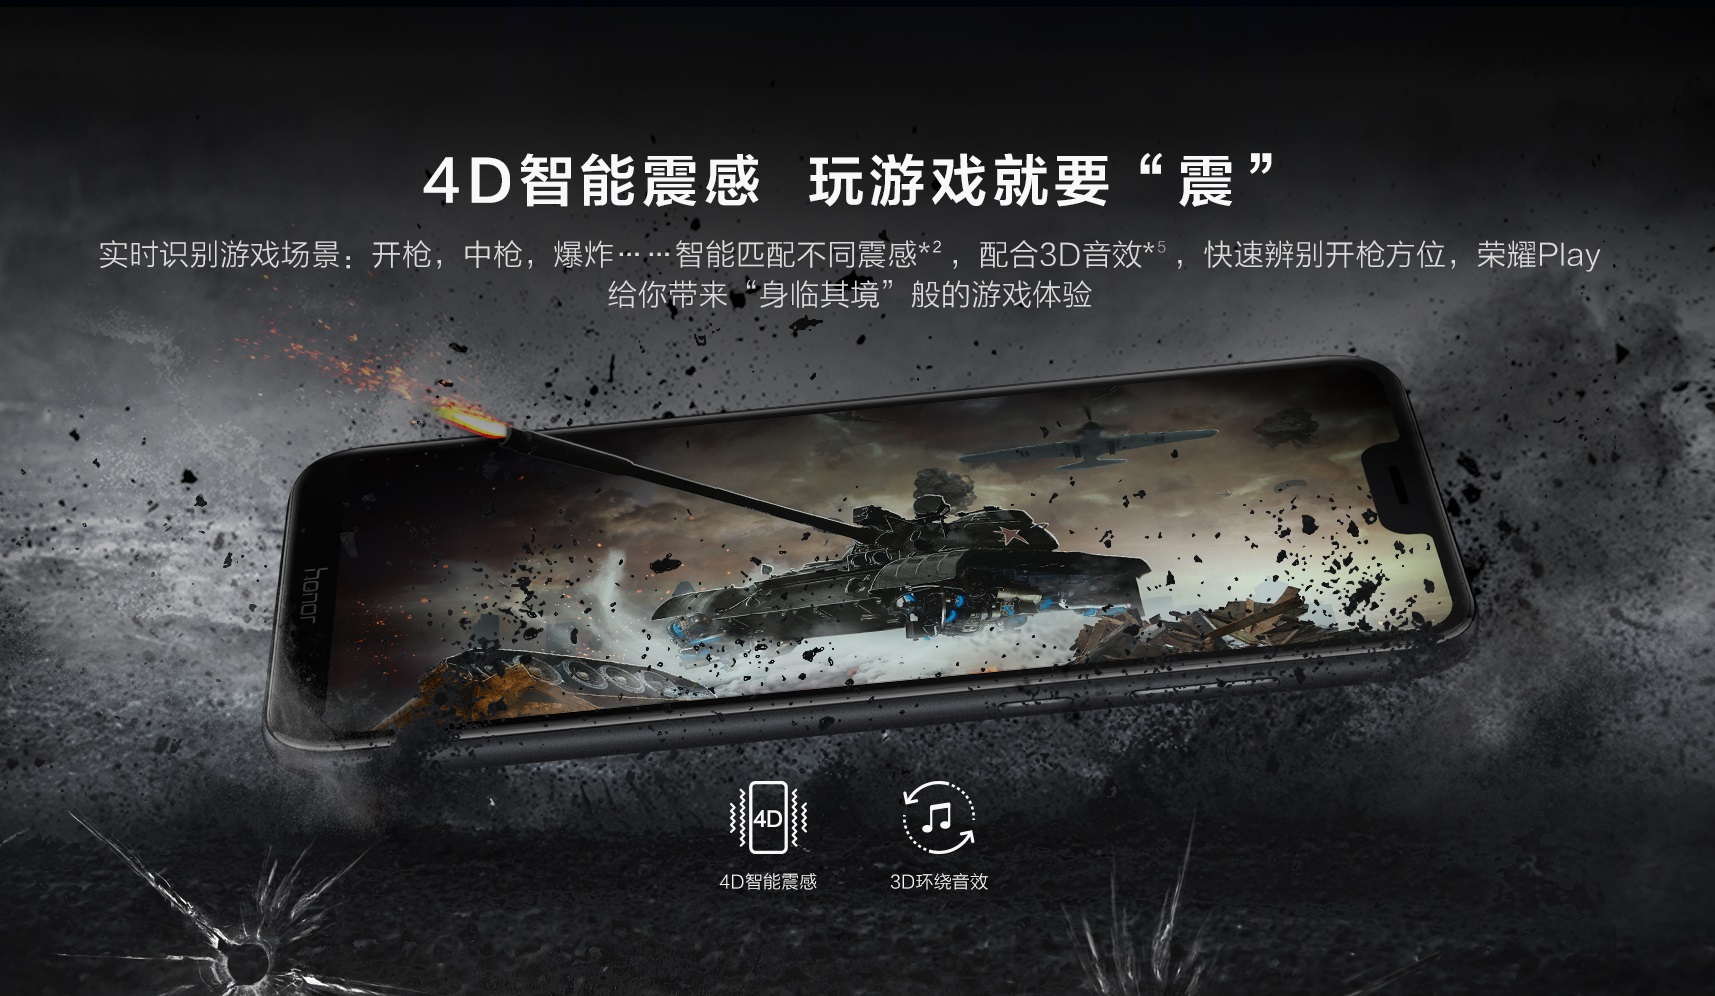 HONOR Play promo featuring a tank coming out of the screen.